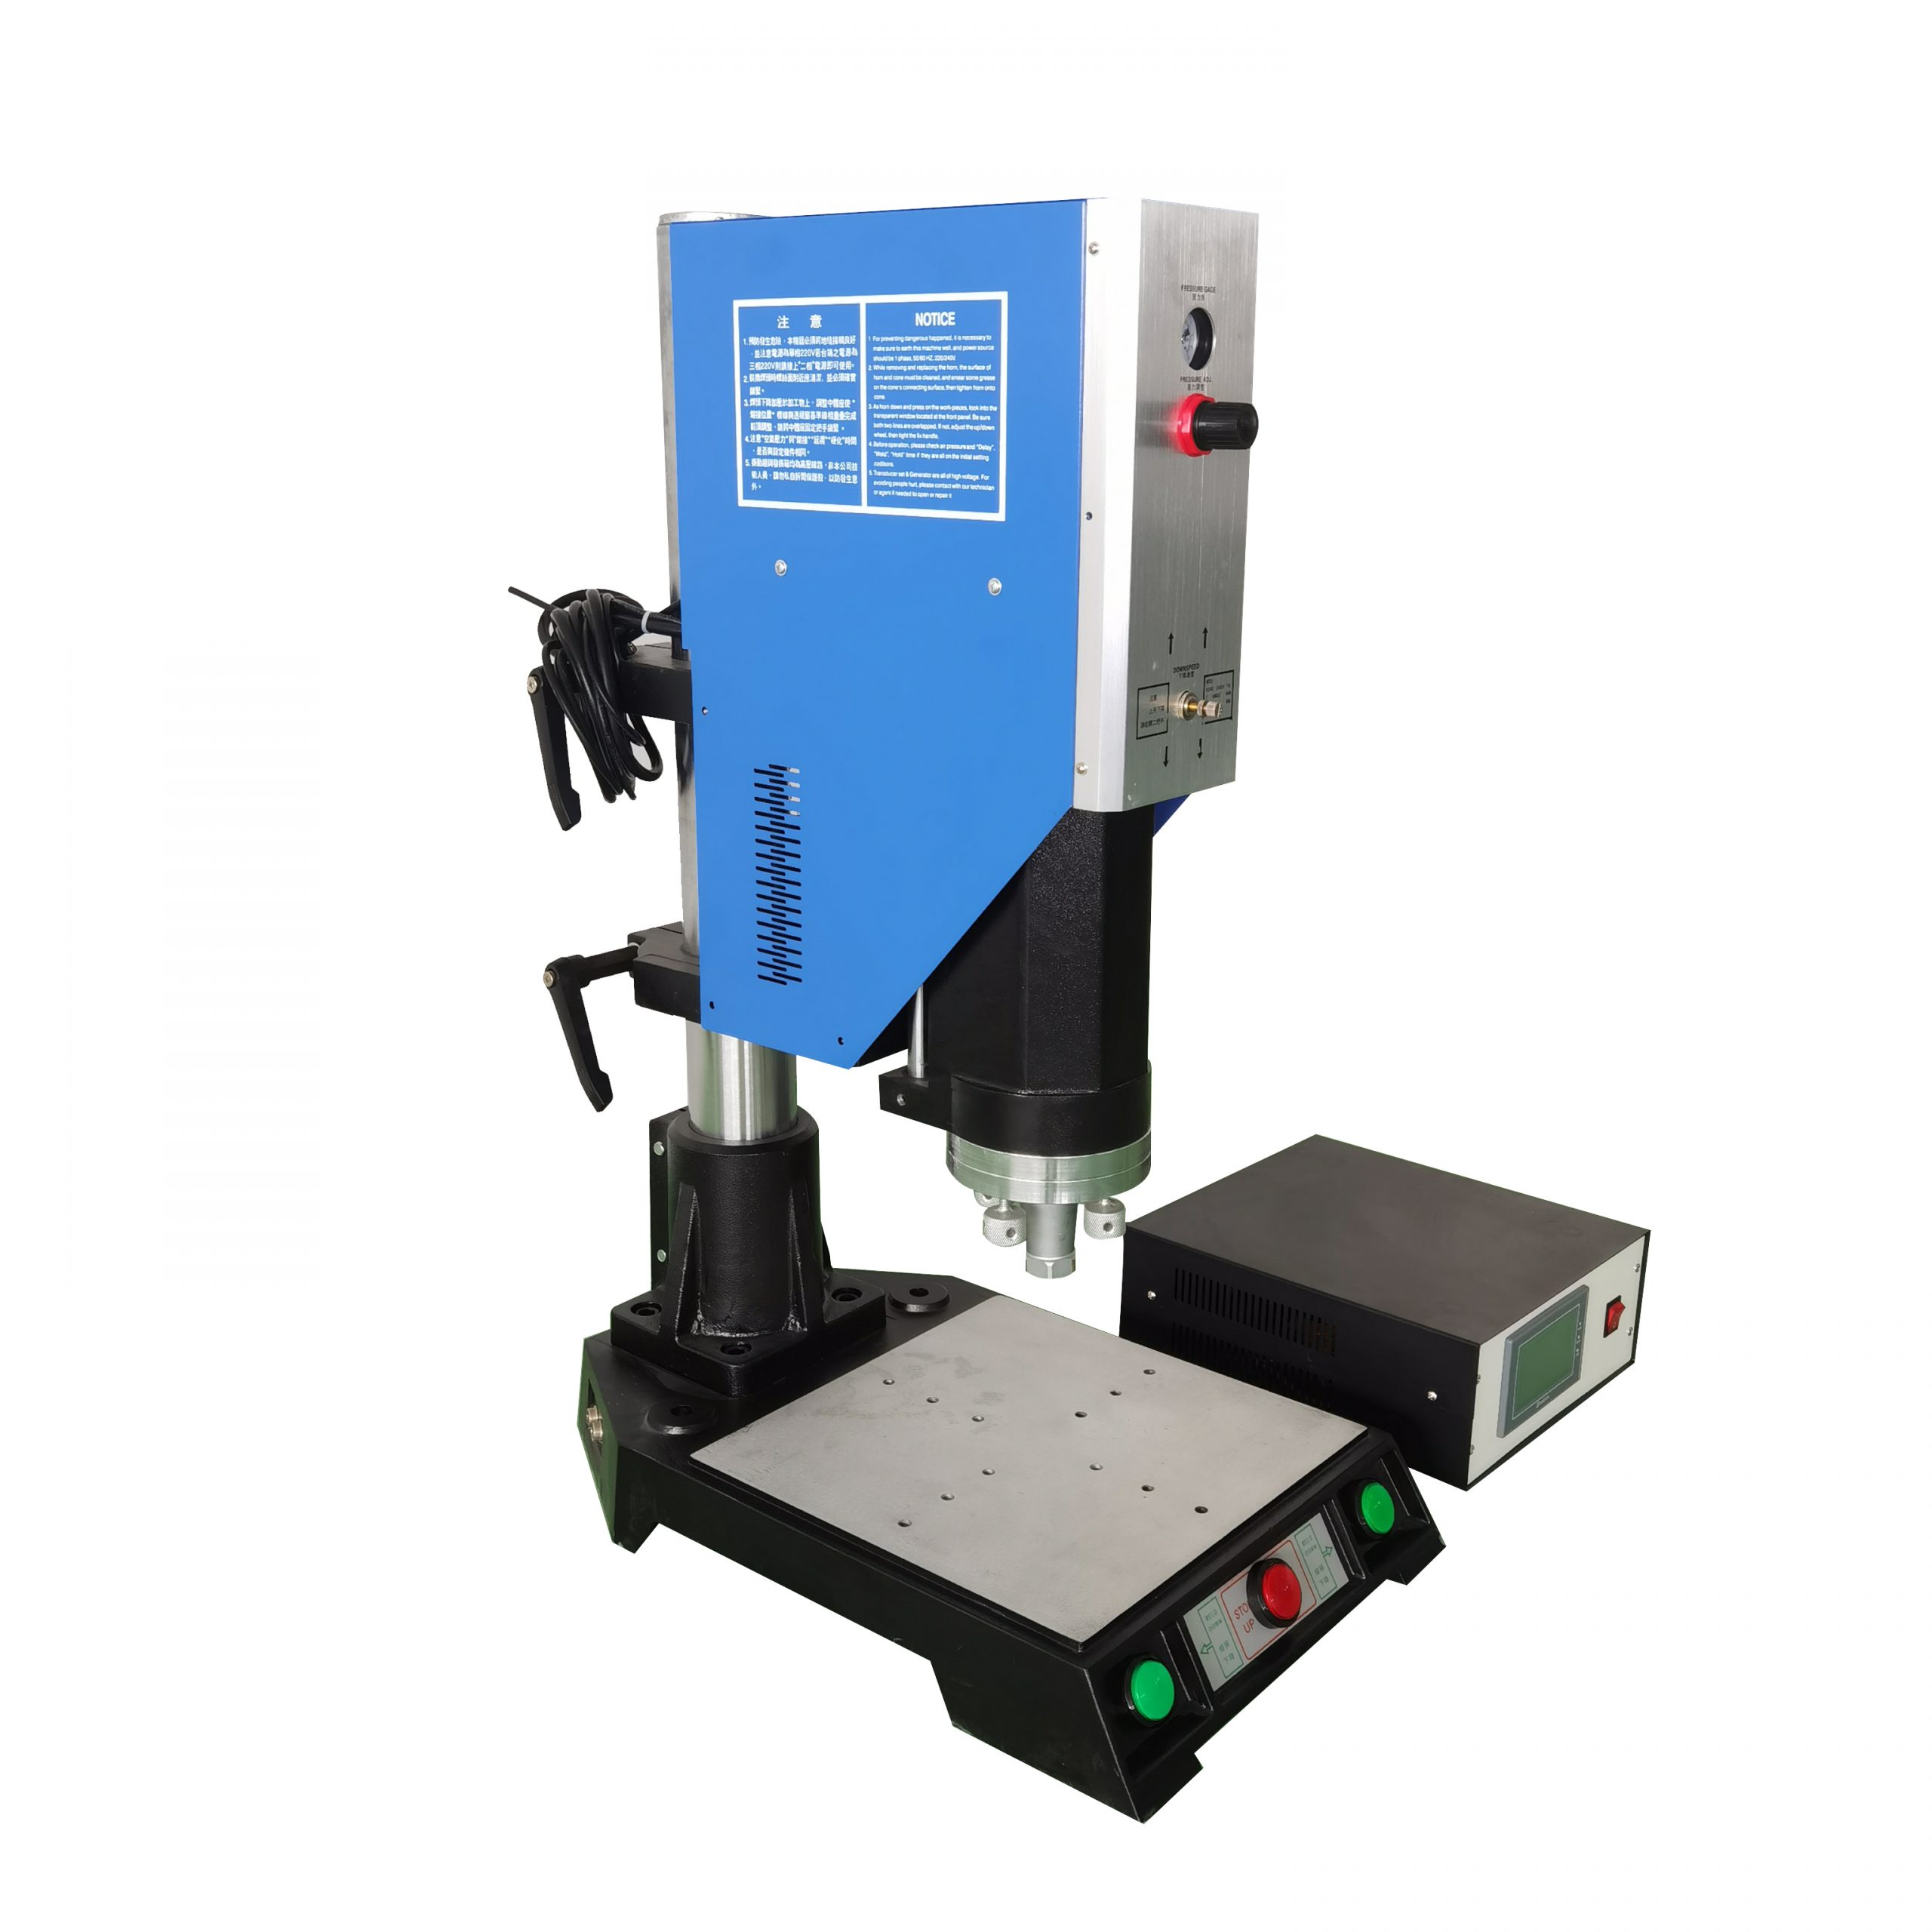 2022112022525791 scaled - 1500W Precision Ultrasonic Plastic Welding Machine For Hard Plastic Material And Signal Generator